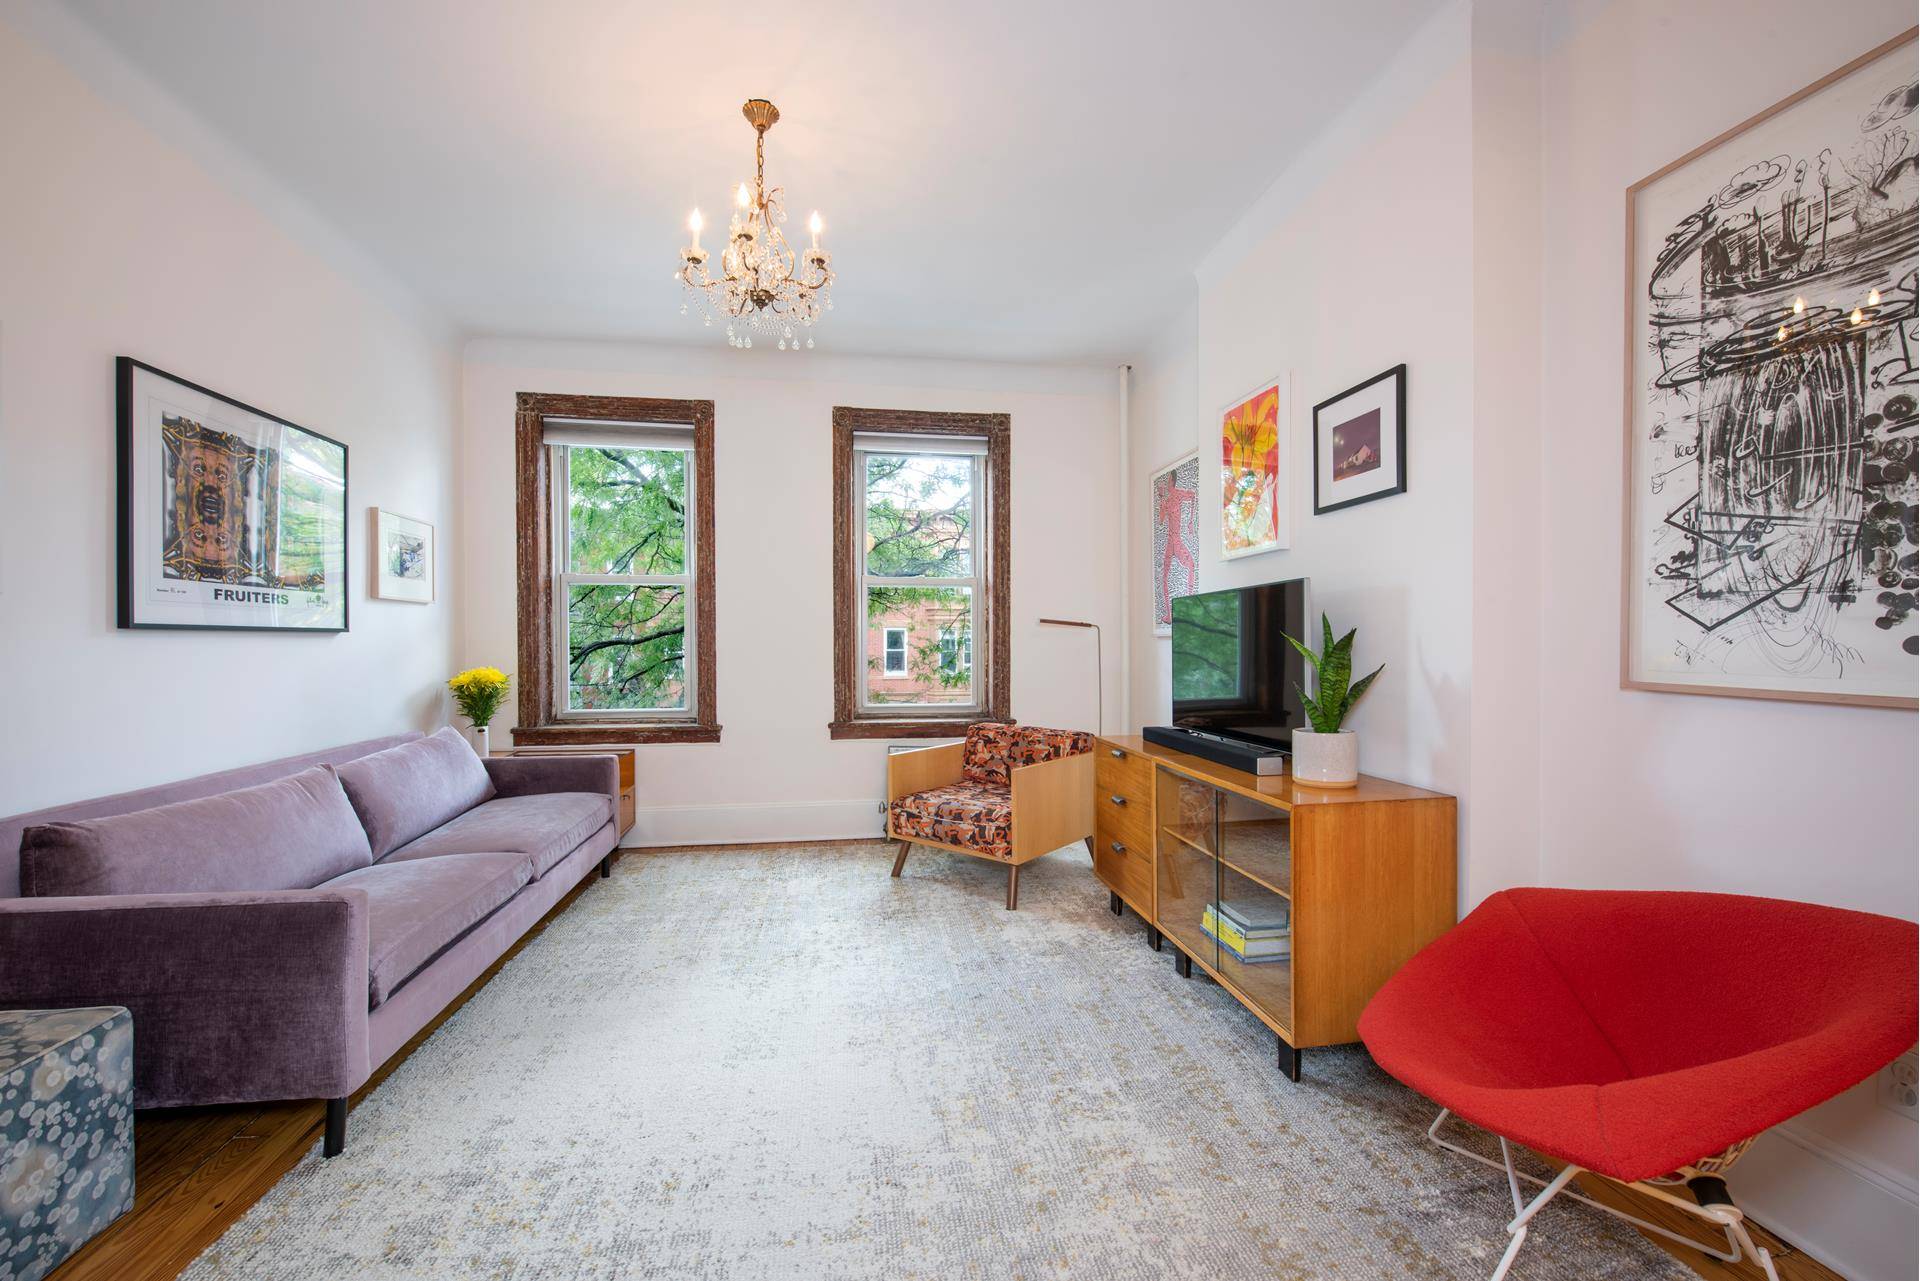 Ideally located on tree lined Prospect Avenue sits a stylish prewar 2 bedroom home.